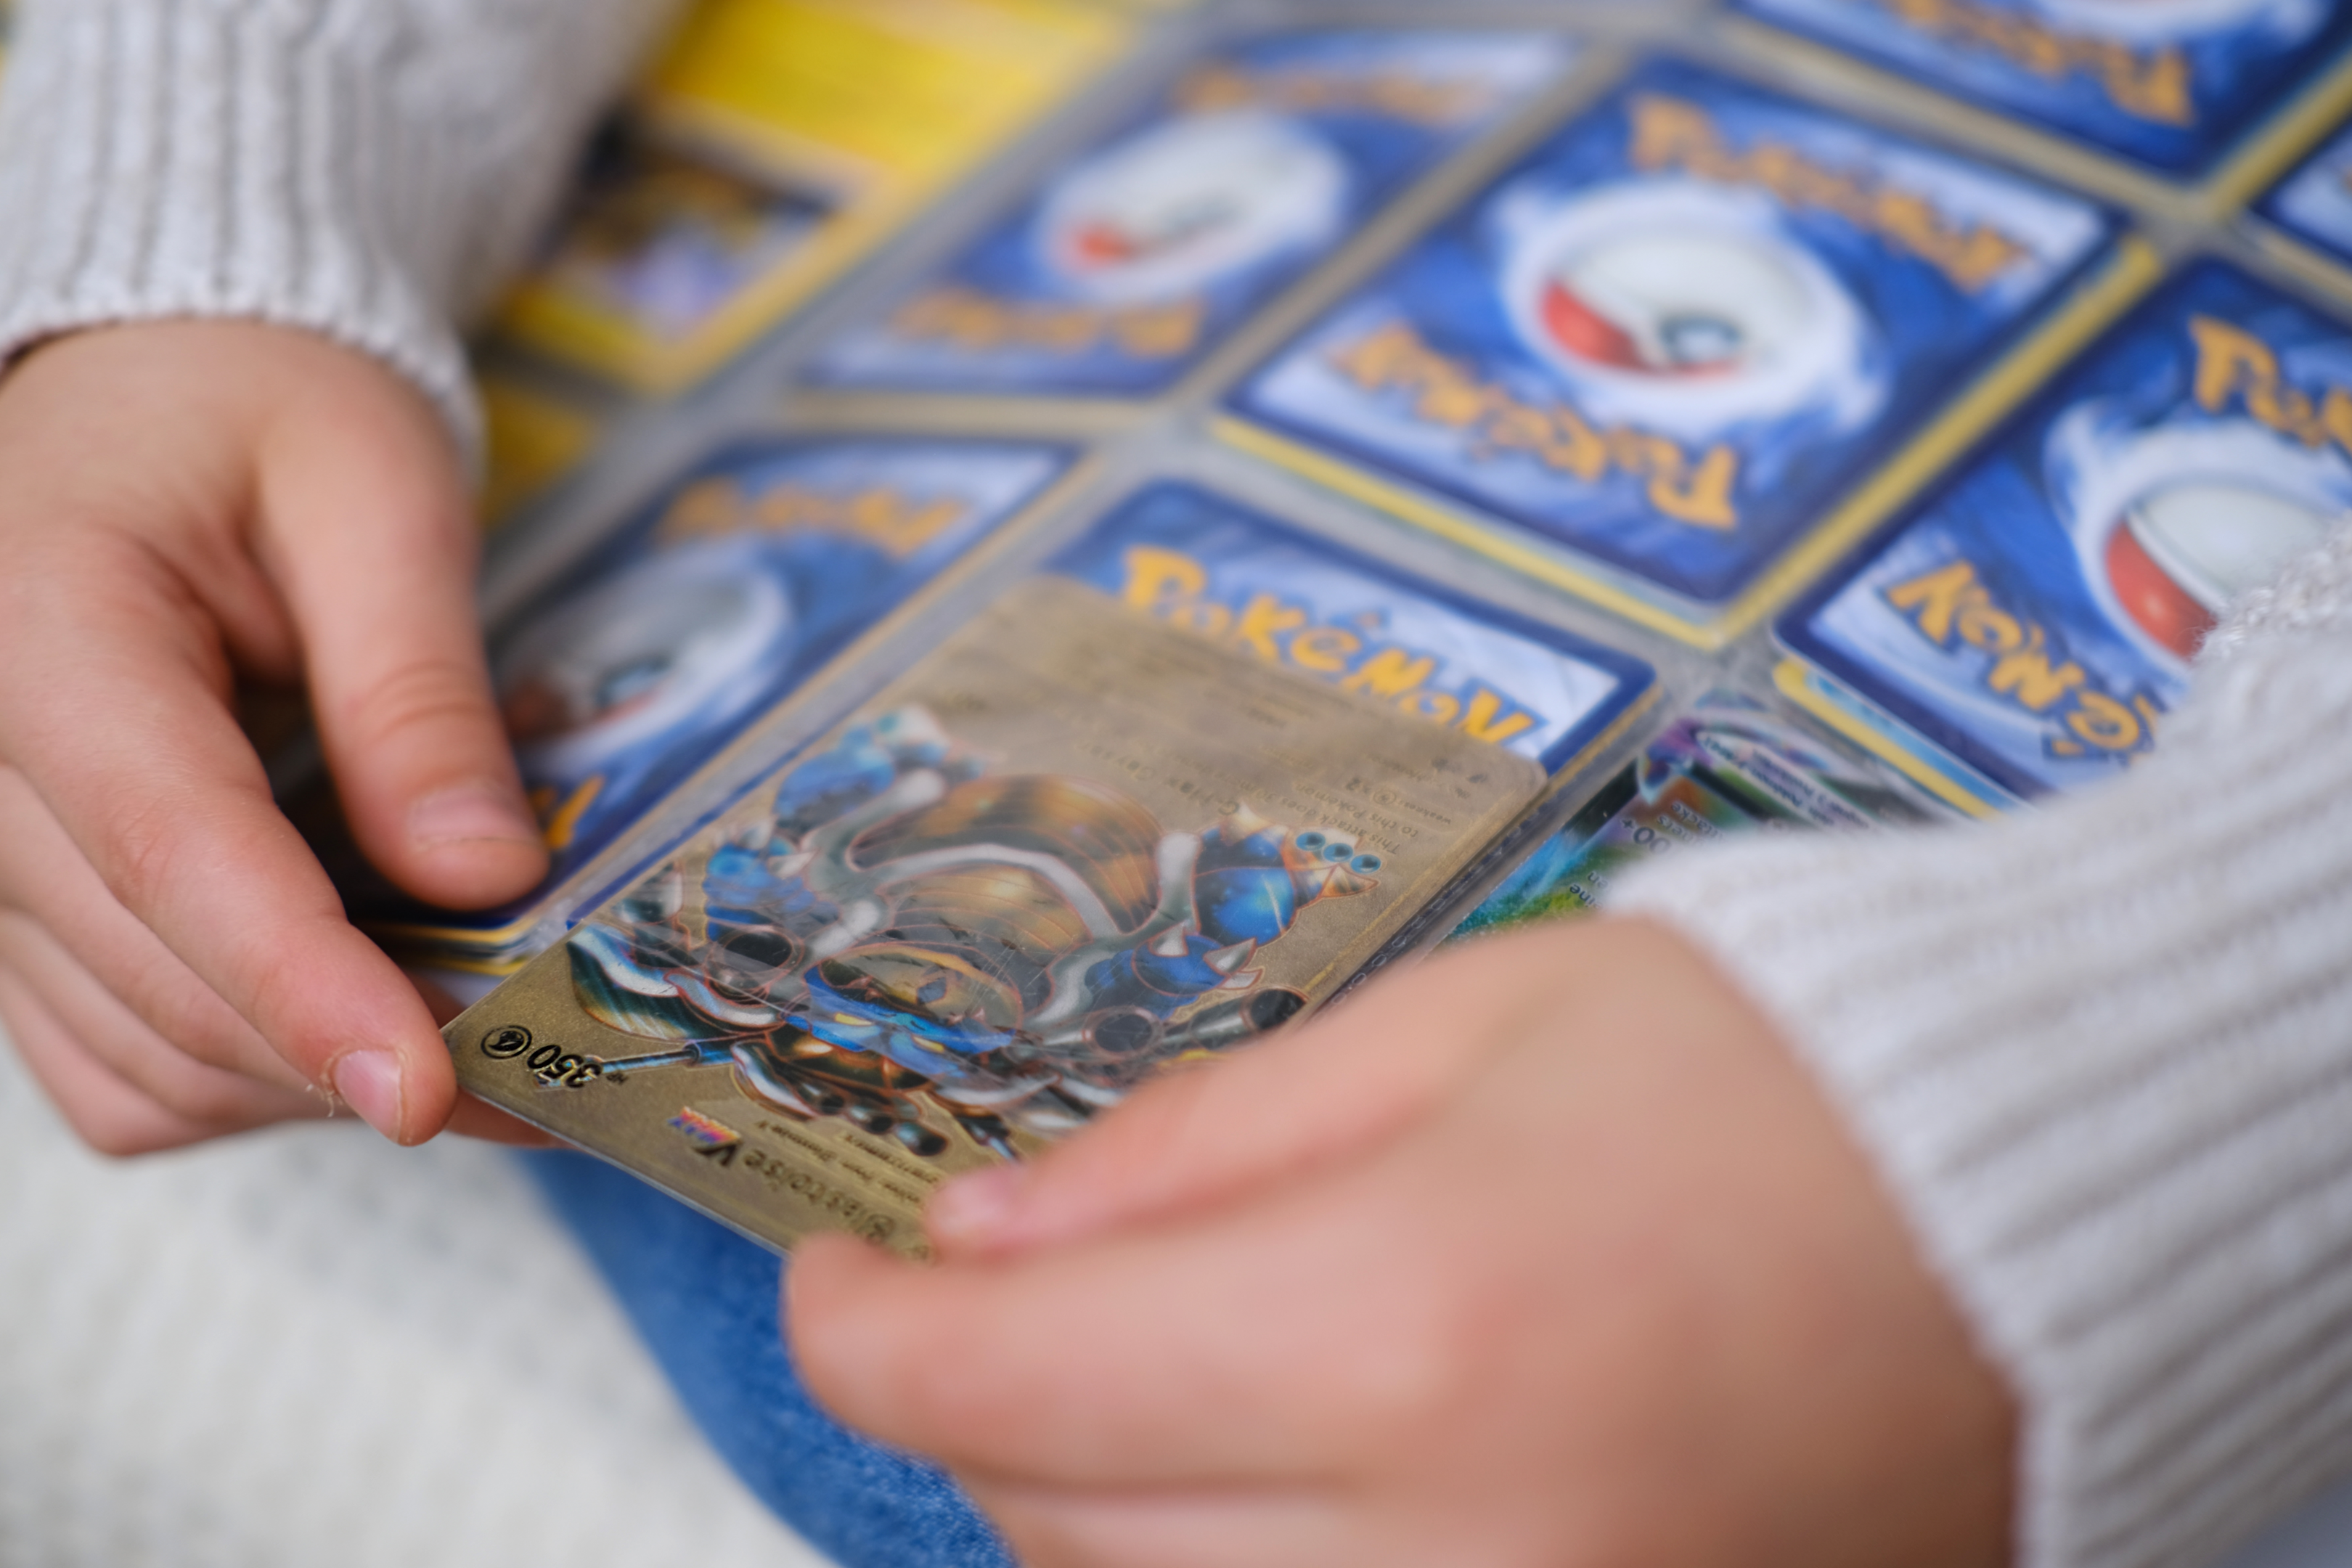 Protecting Pokemon cards from damage by putting them in a binder